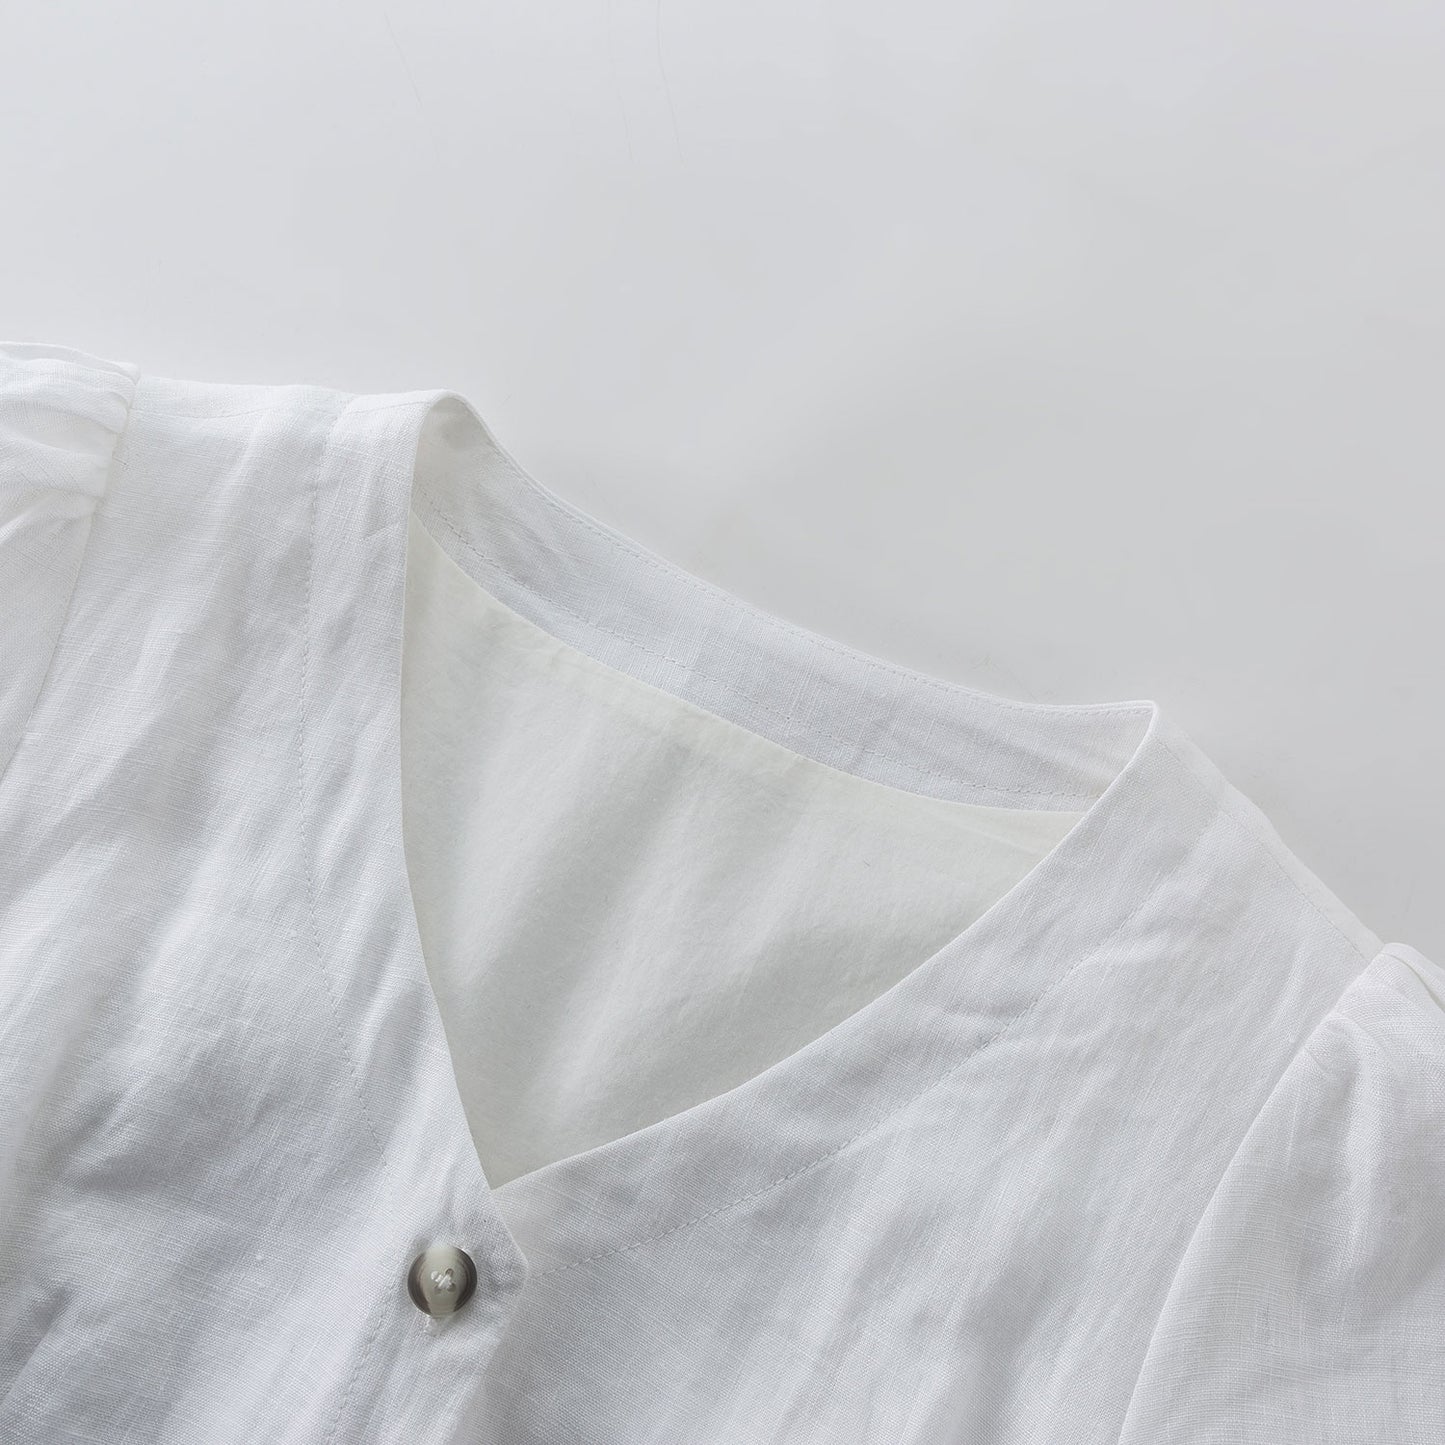 Button down white linen dress with pockets 4922